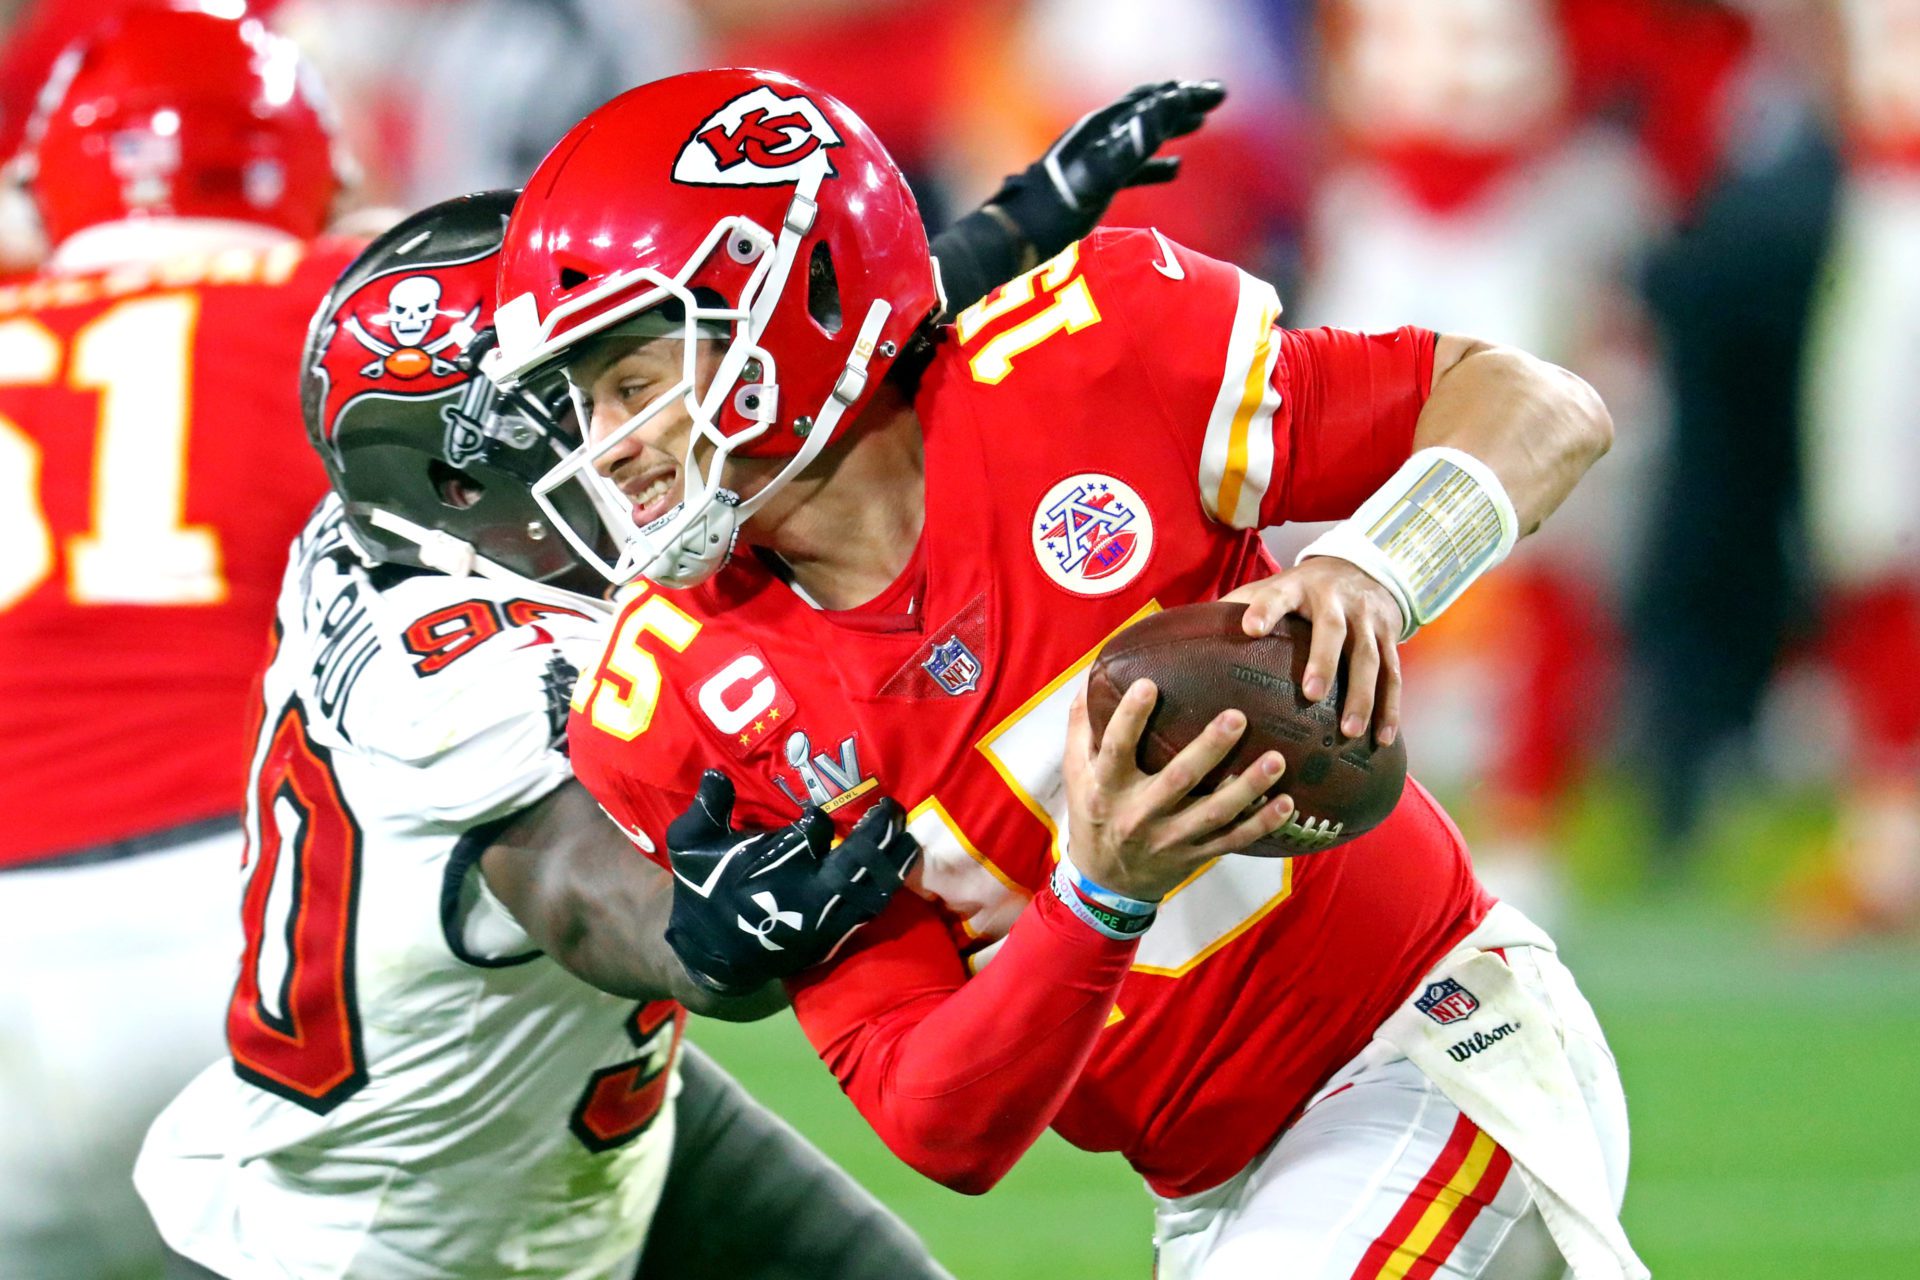 Patrick Mahomes was recently named the top player in the NFL according to his peers, can he keep the Chiefs well-oiled train moving forward? Josh Shippen of NFLHeads2020 recently put together his list of the top QB's